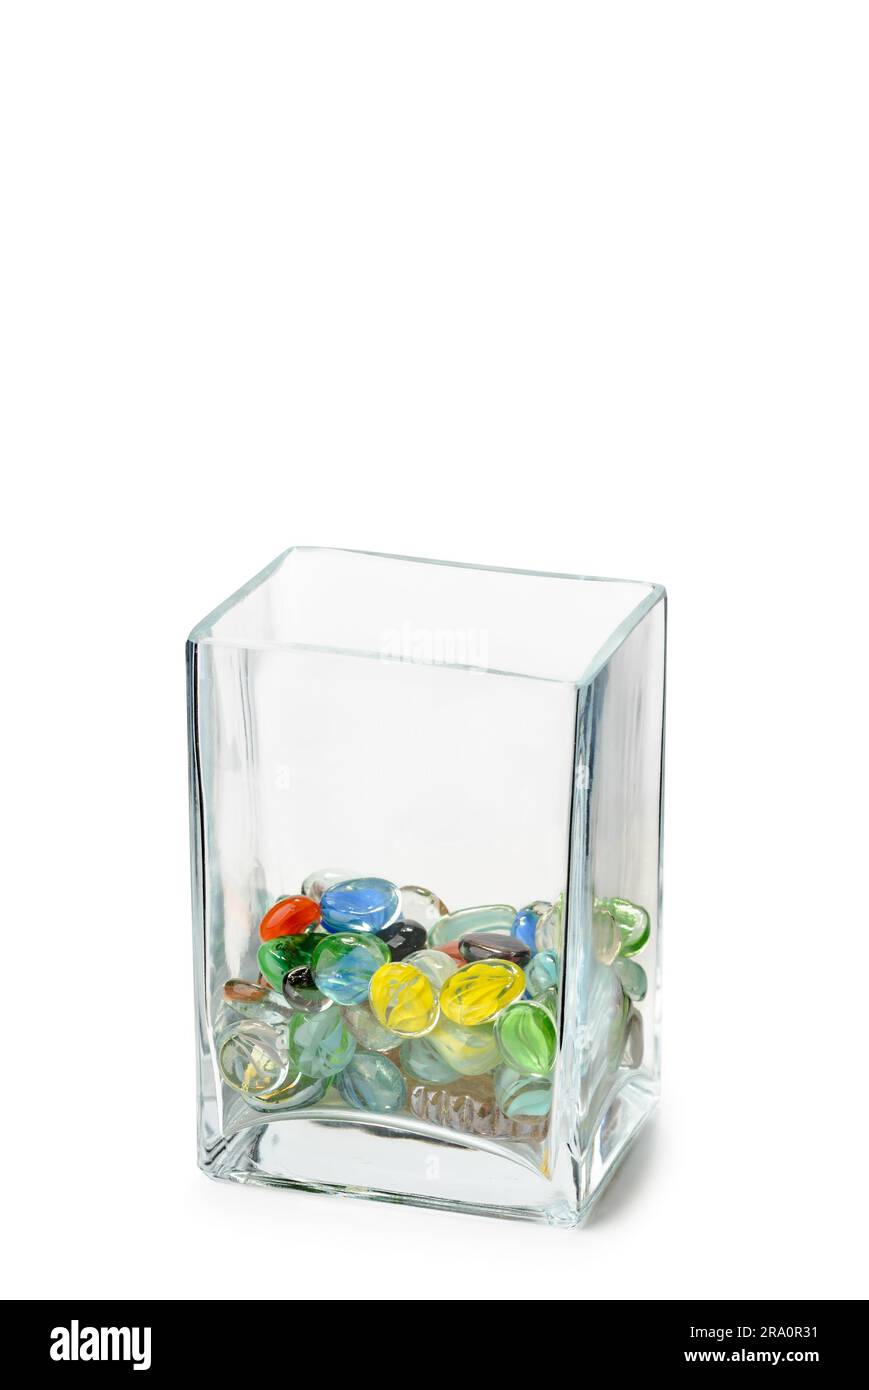 A Parallelepipedic transparent crystal vase isolated on white background, half full of colored glass beads Stock Photo